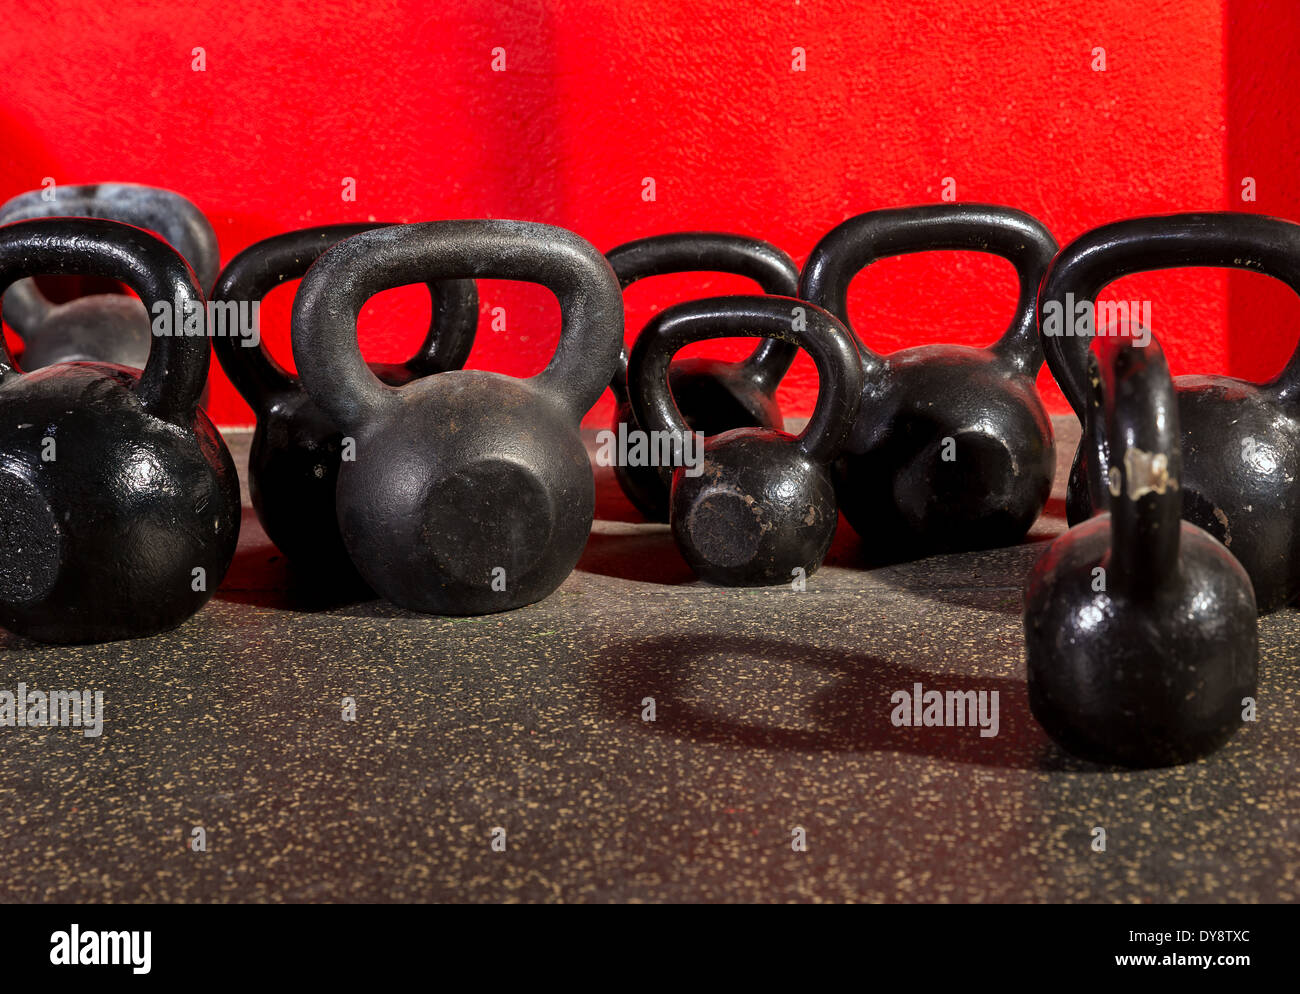 Kettlebells weights in a workout gym in red background Stock Photo